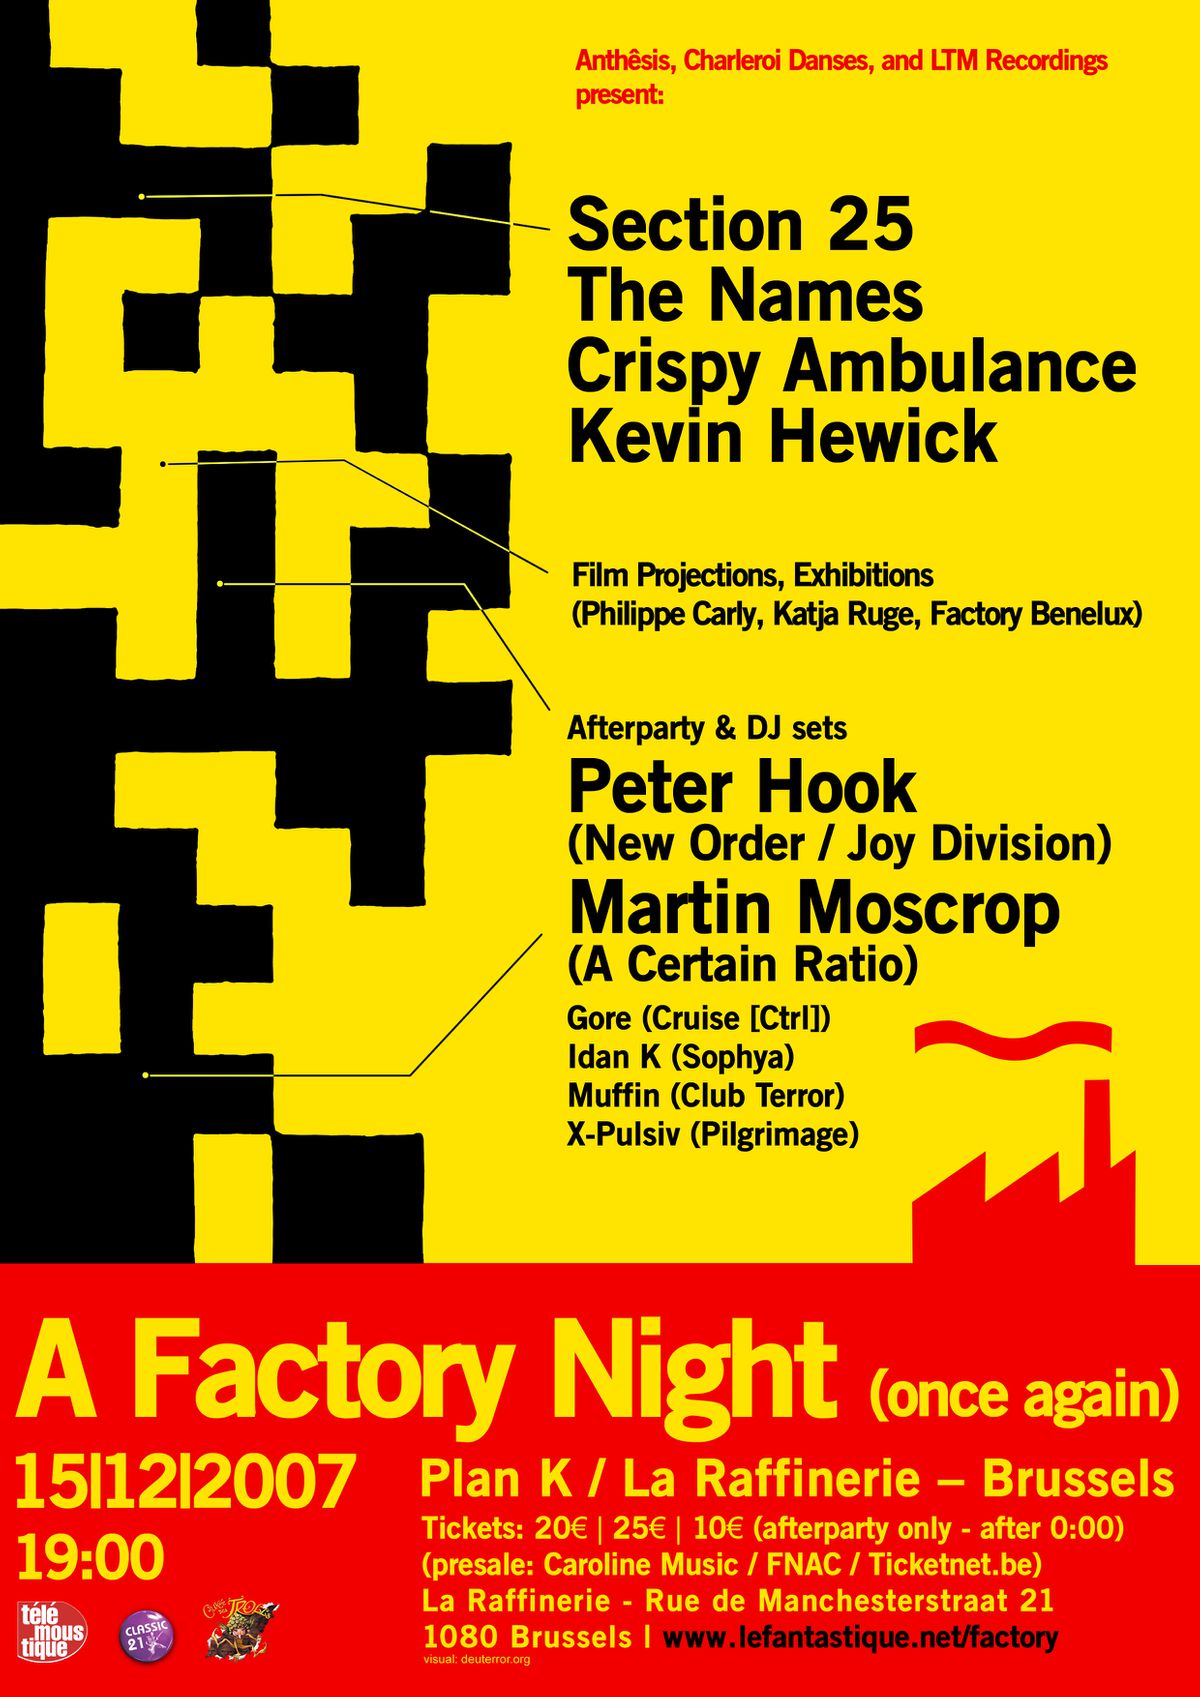 A Factory Night (once again) - Factory revisited